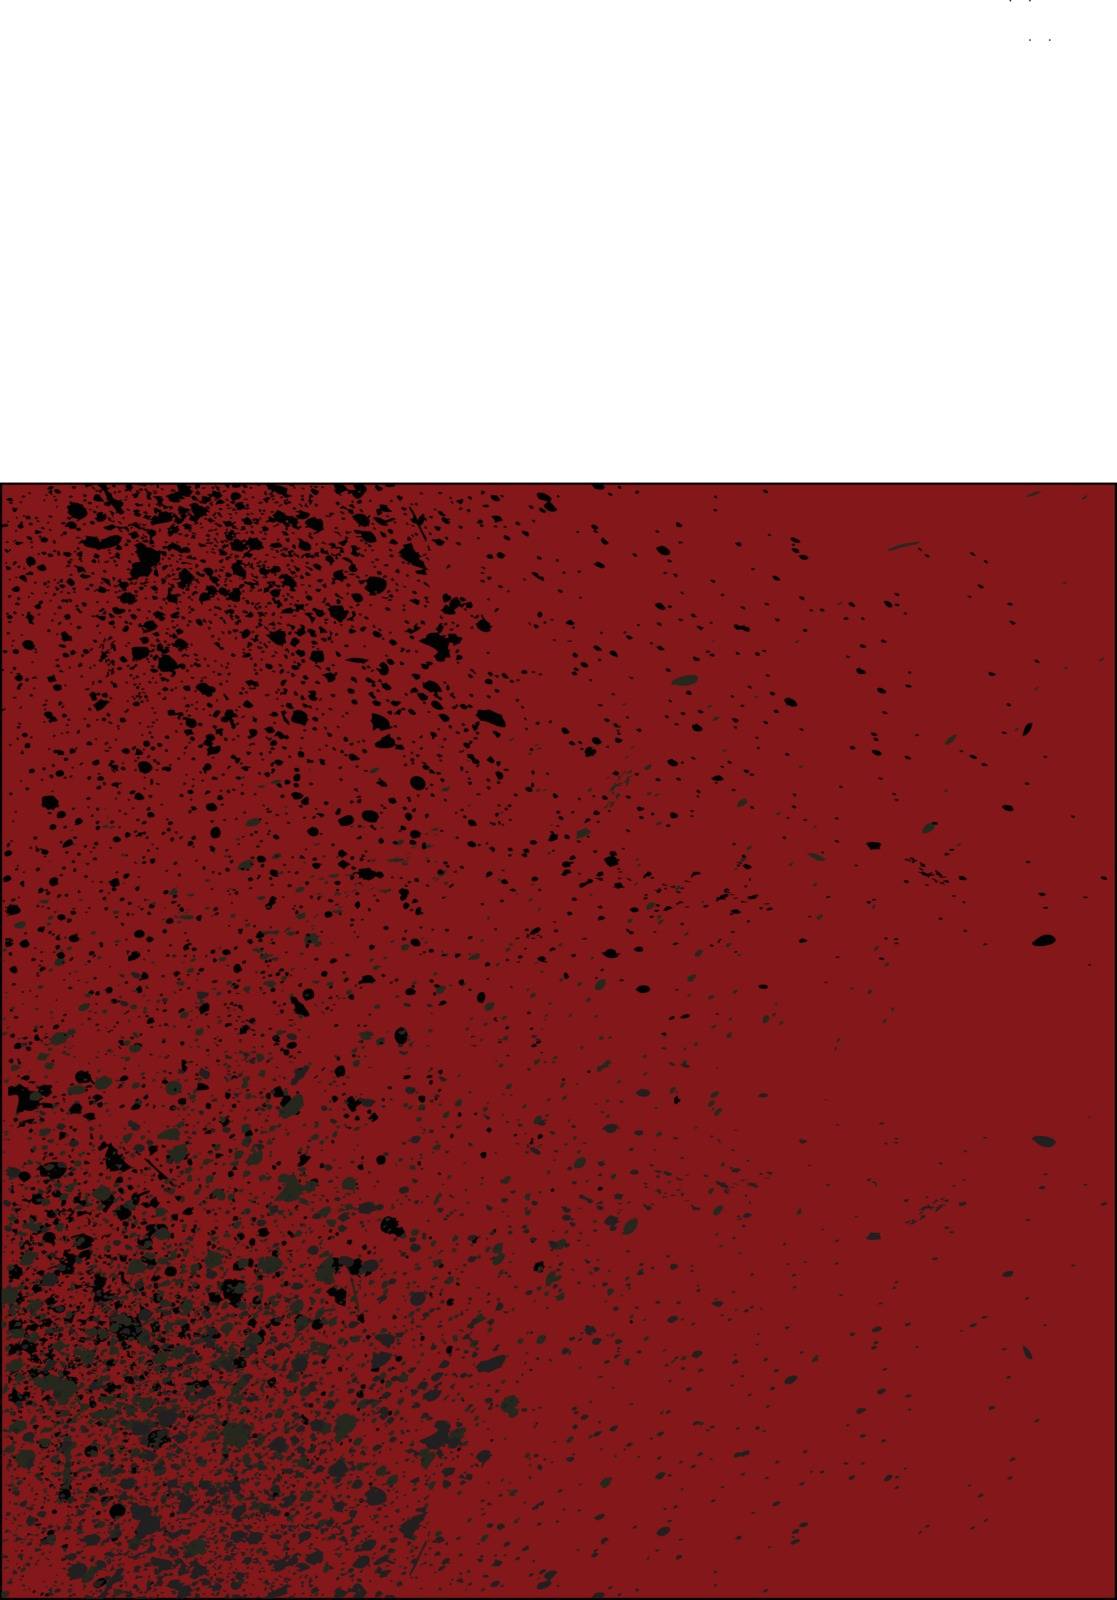 Red blood splatter background with dribble effect